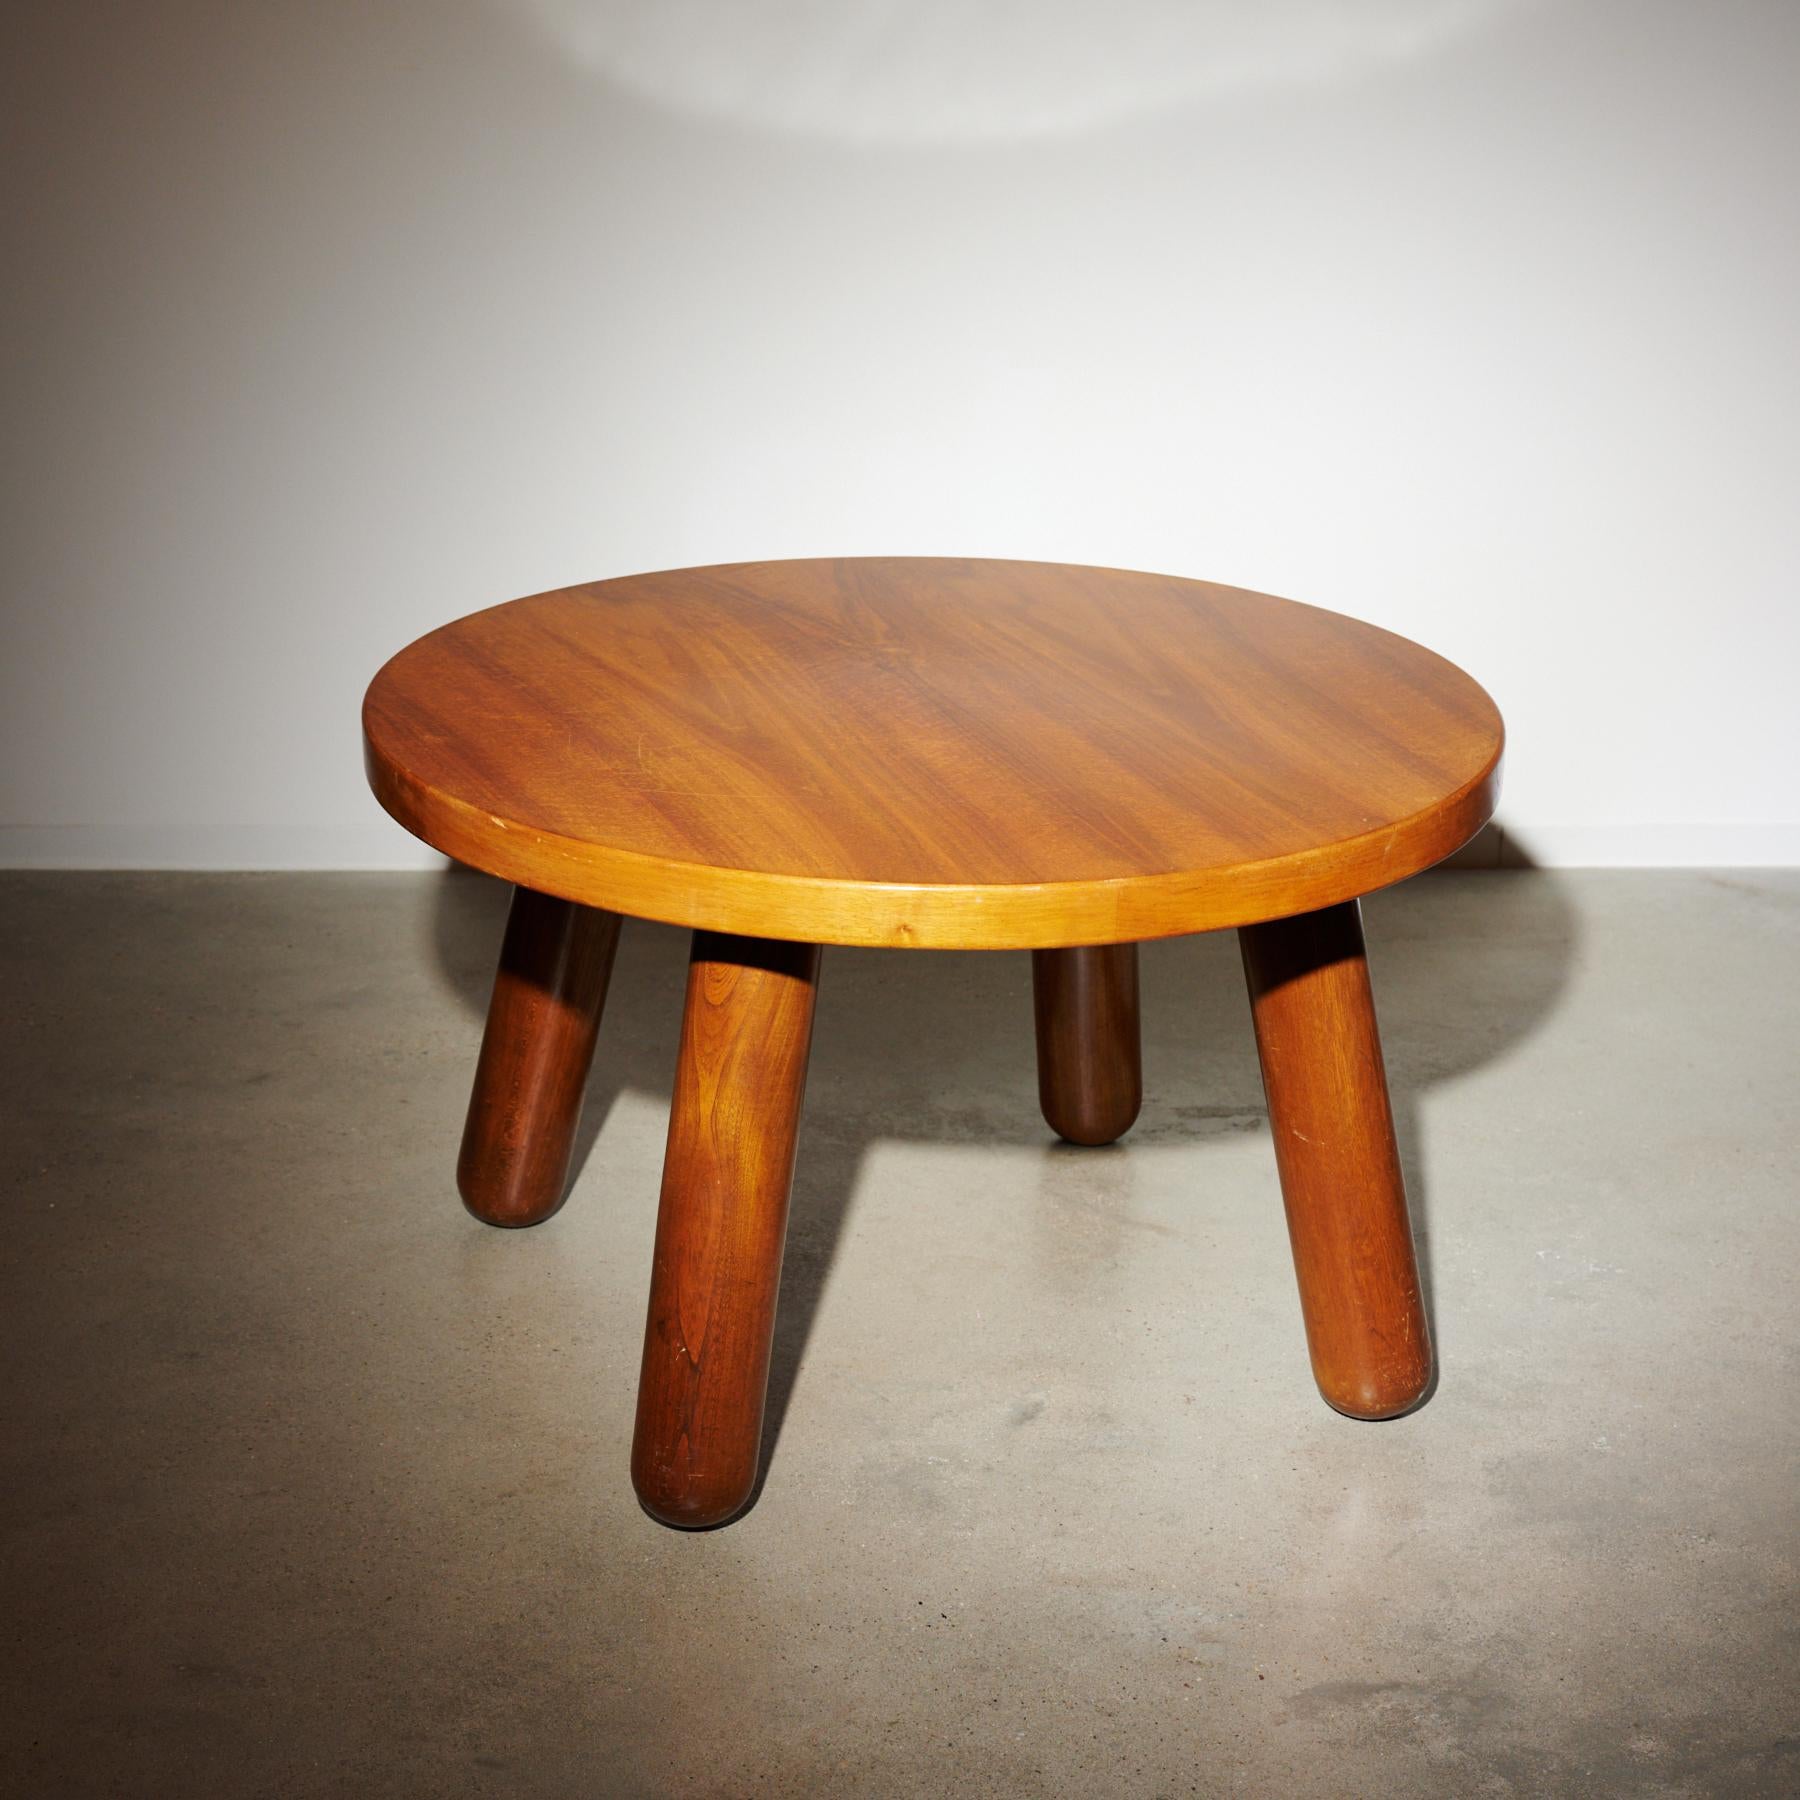 Coffee table in nutwood and stained elm by Otto Faerge.

Circular coffee table of nutwood with solid legs of stained elm. This example made 1940s by cabinetmaker Otto Færge.

Additional information: 
Material: nutwood, stained elm 
Artist: